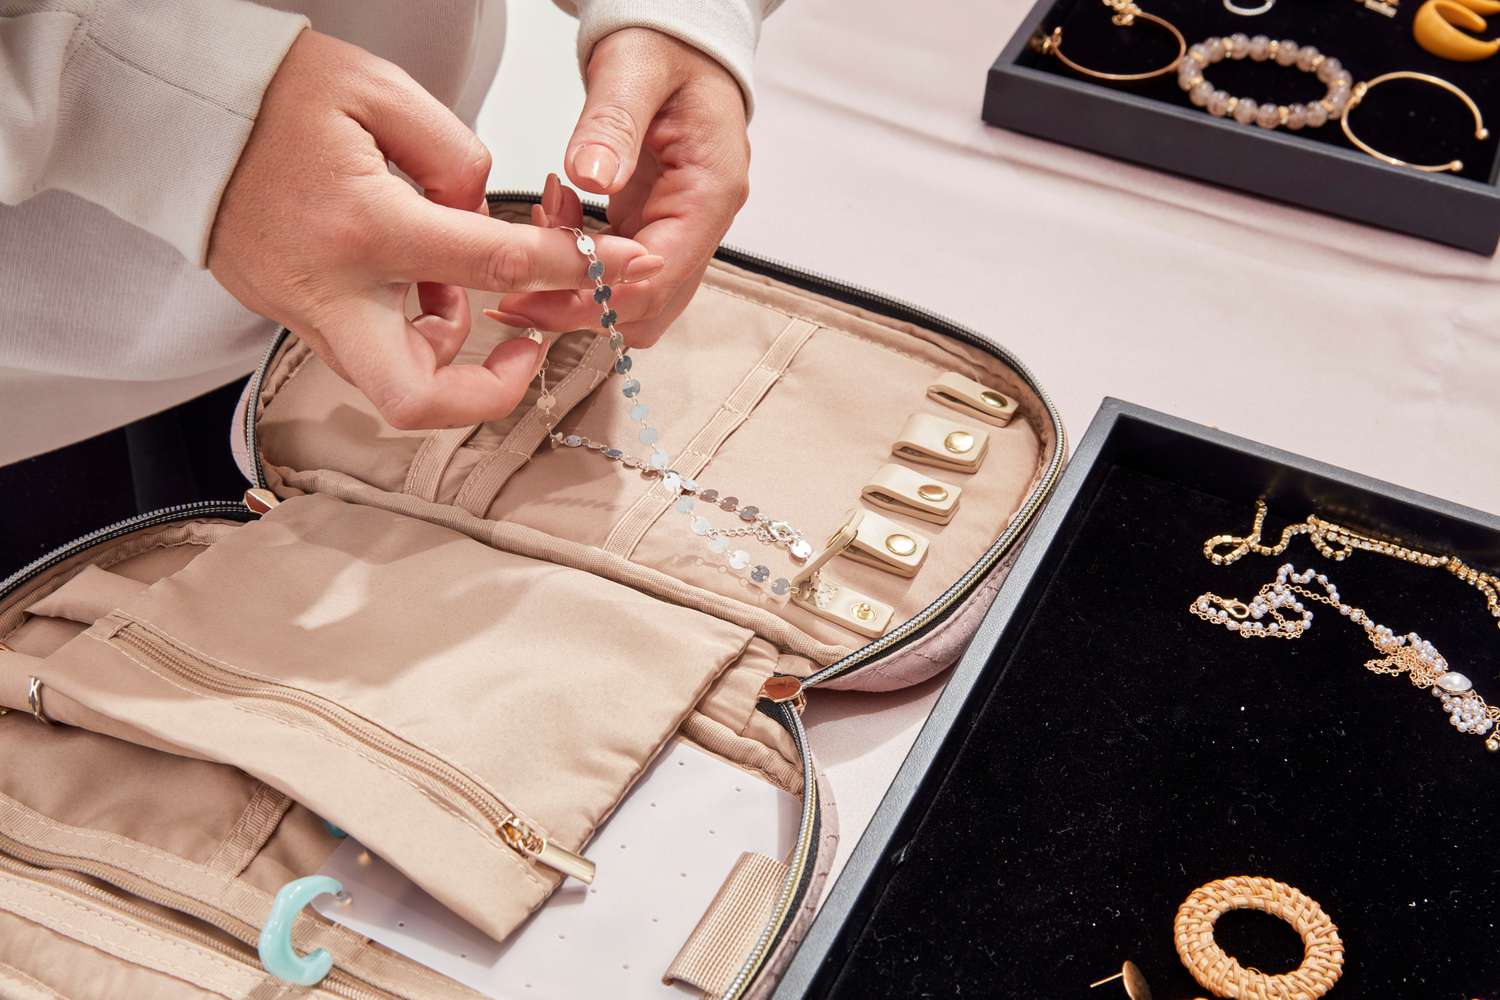 A person putting jewelry into the Bagsmart Jewelry Organizer Bag.